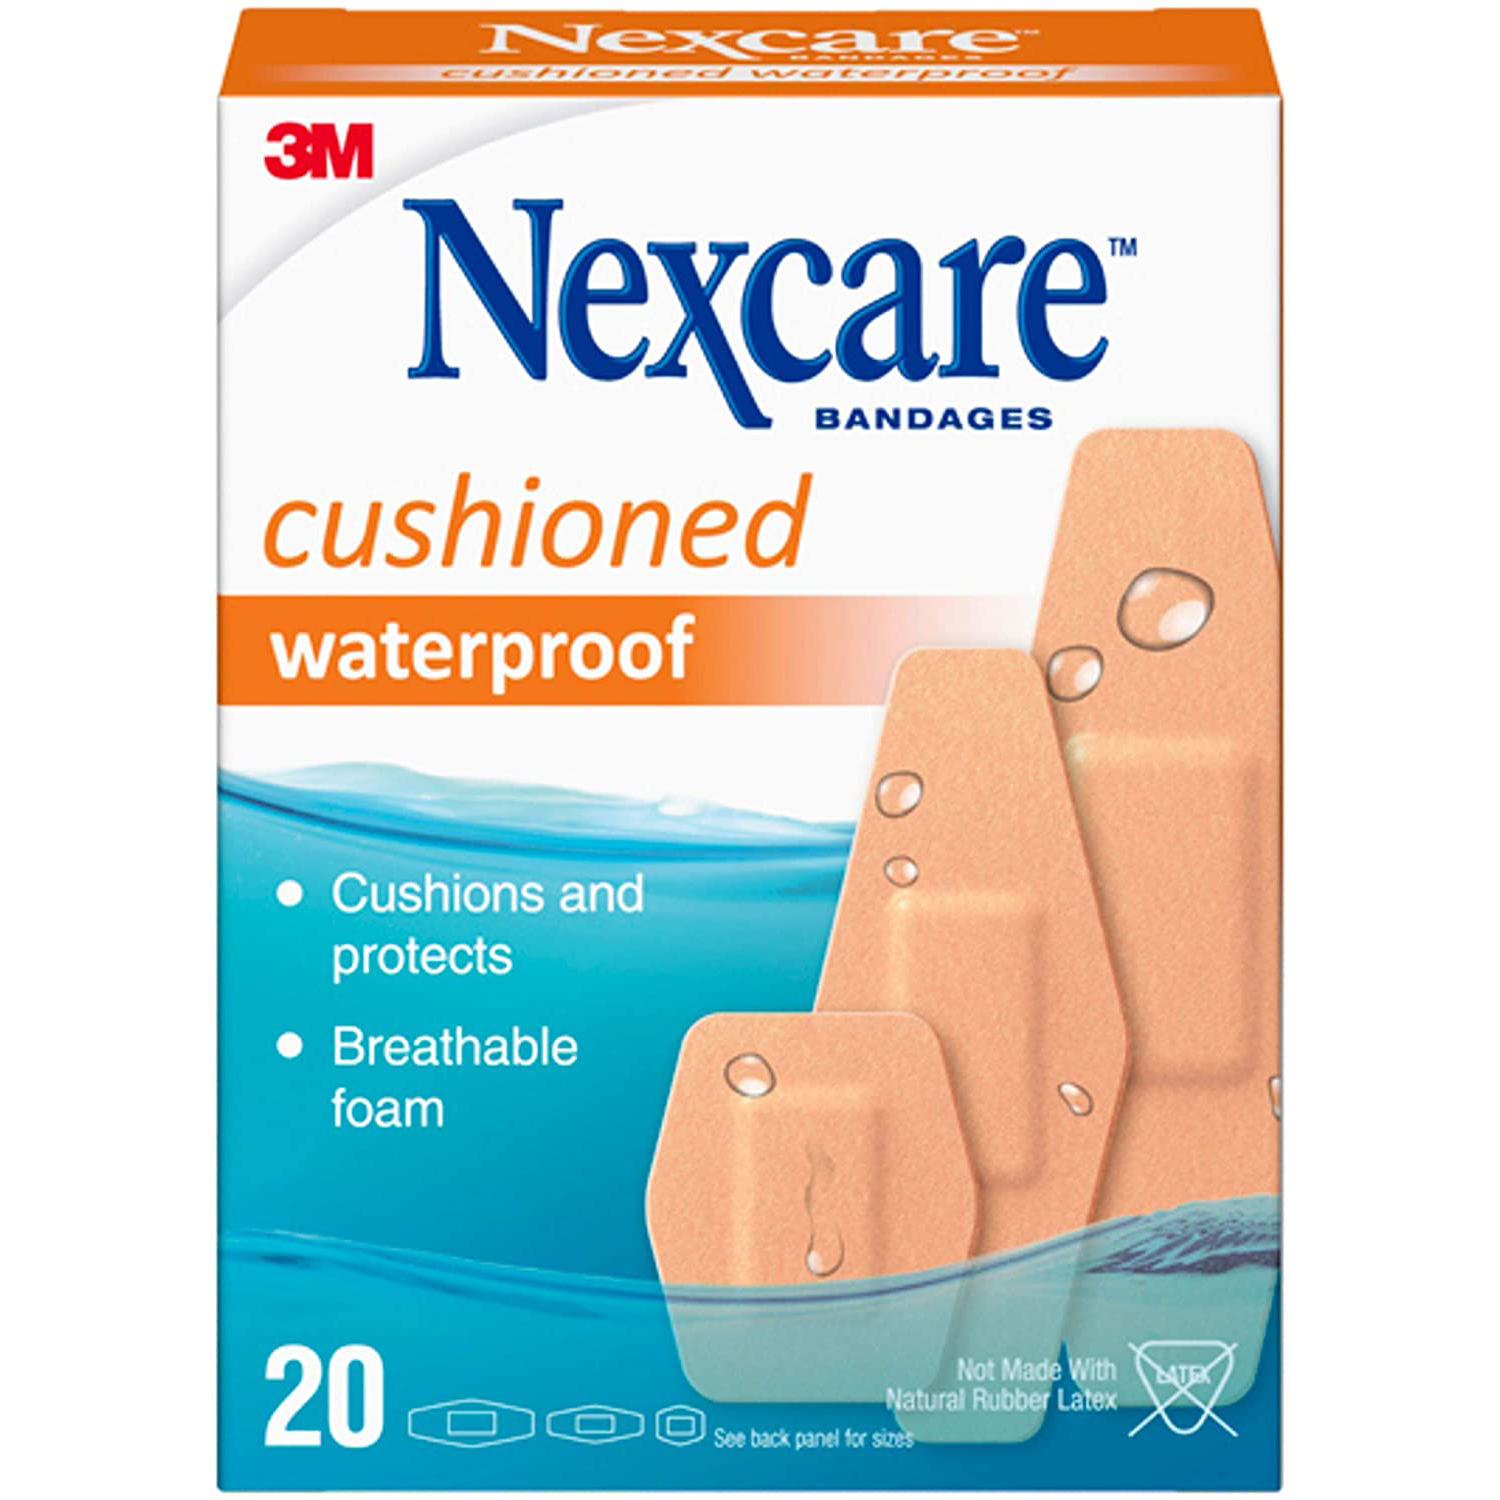 3M CB Nexcare Cushioned Waterproof Bandages &amp; Pads